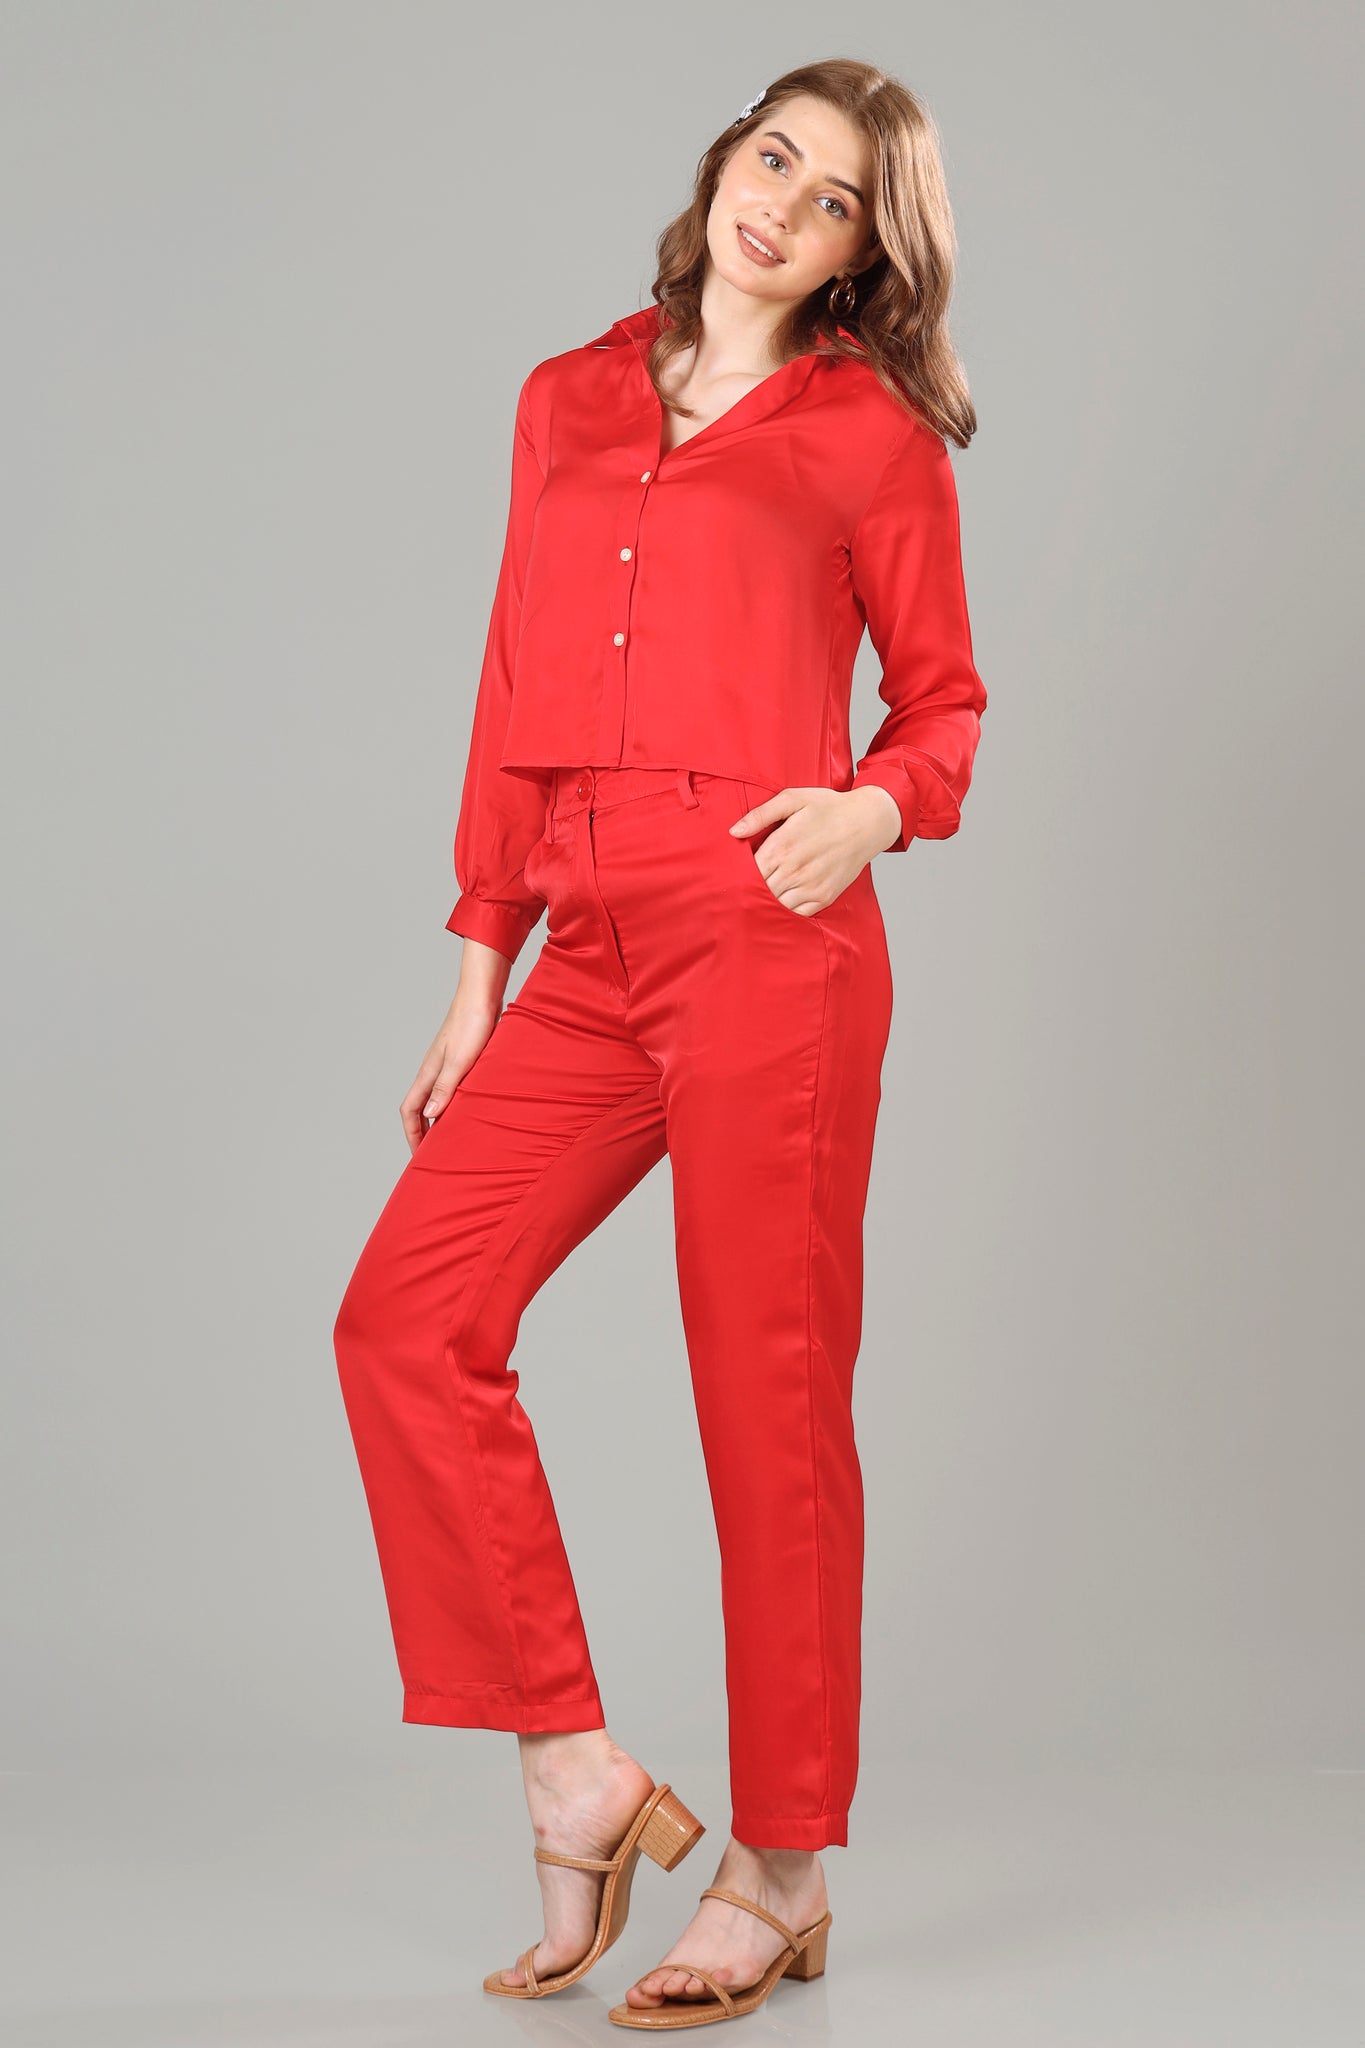 Romantic Red Cropped Shirt Co-Ord Set For Women